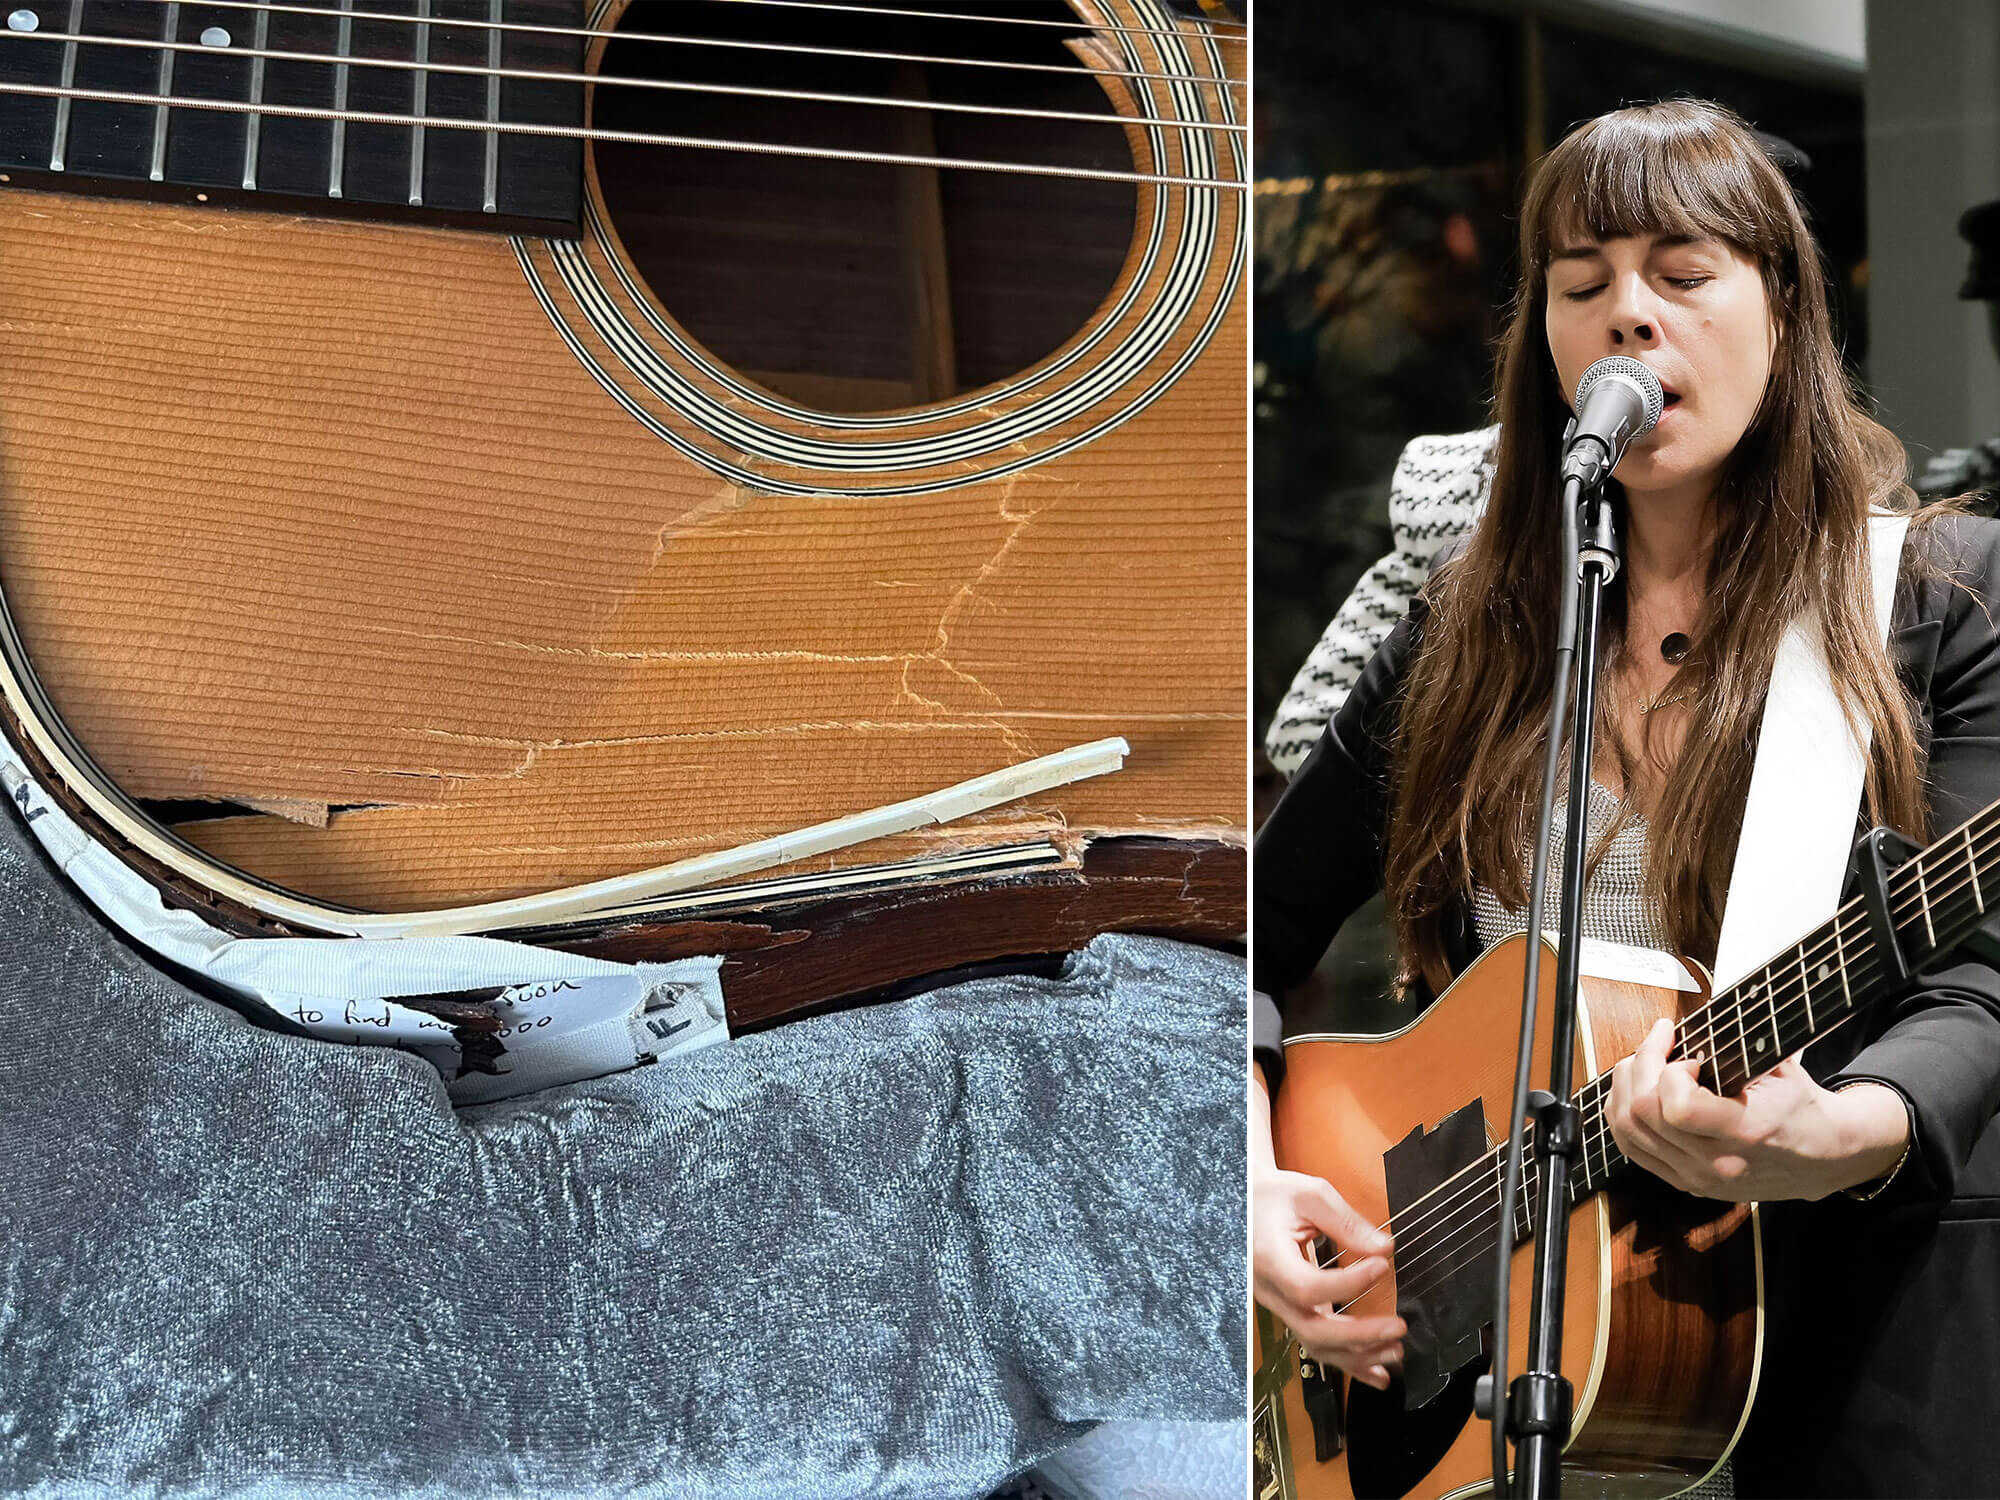 [L] Picture of Madi Diaz's destroyed Martin guitar, and [R] Madi Diaz playing the same guitar onstage